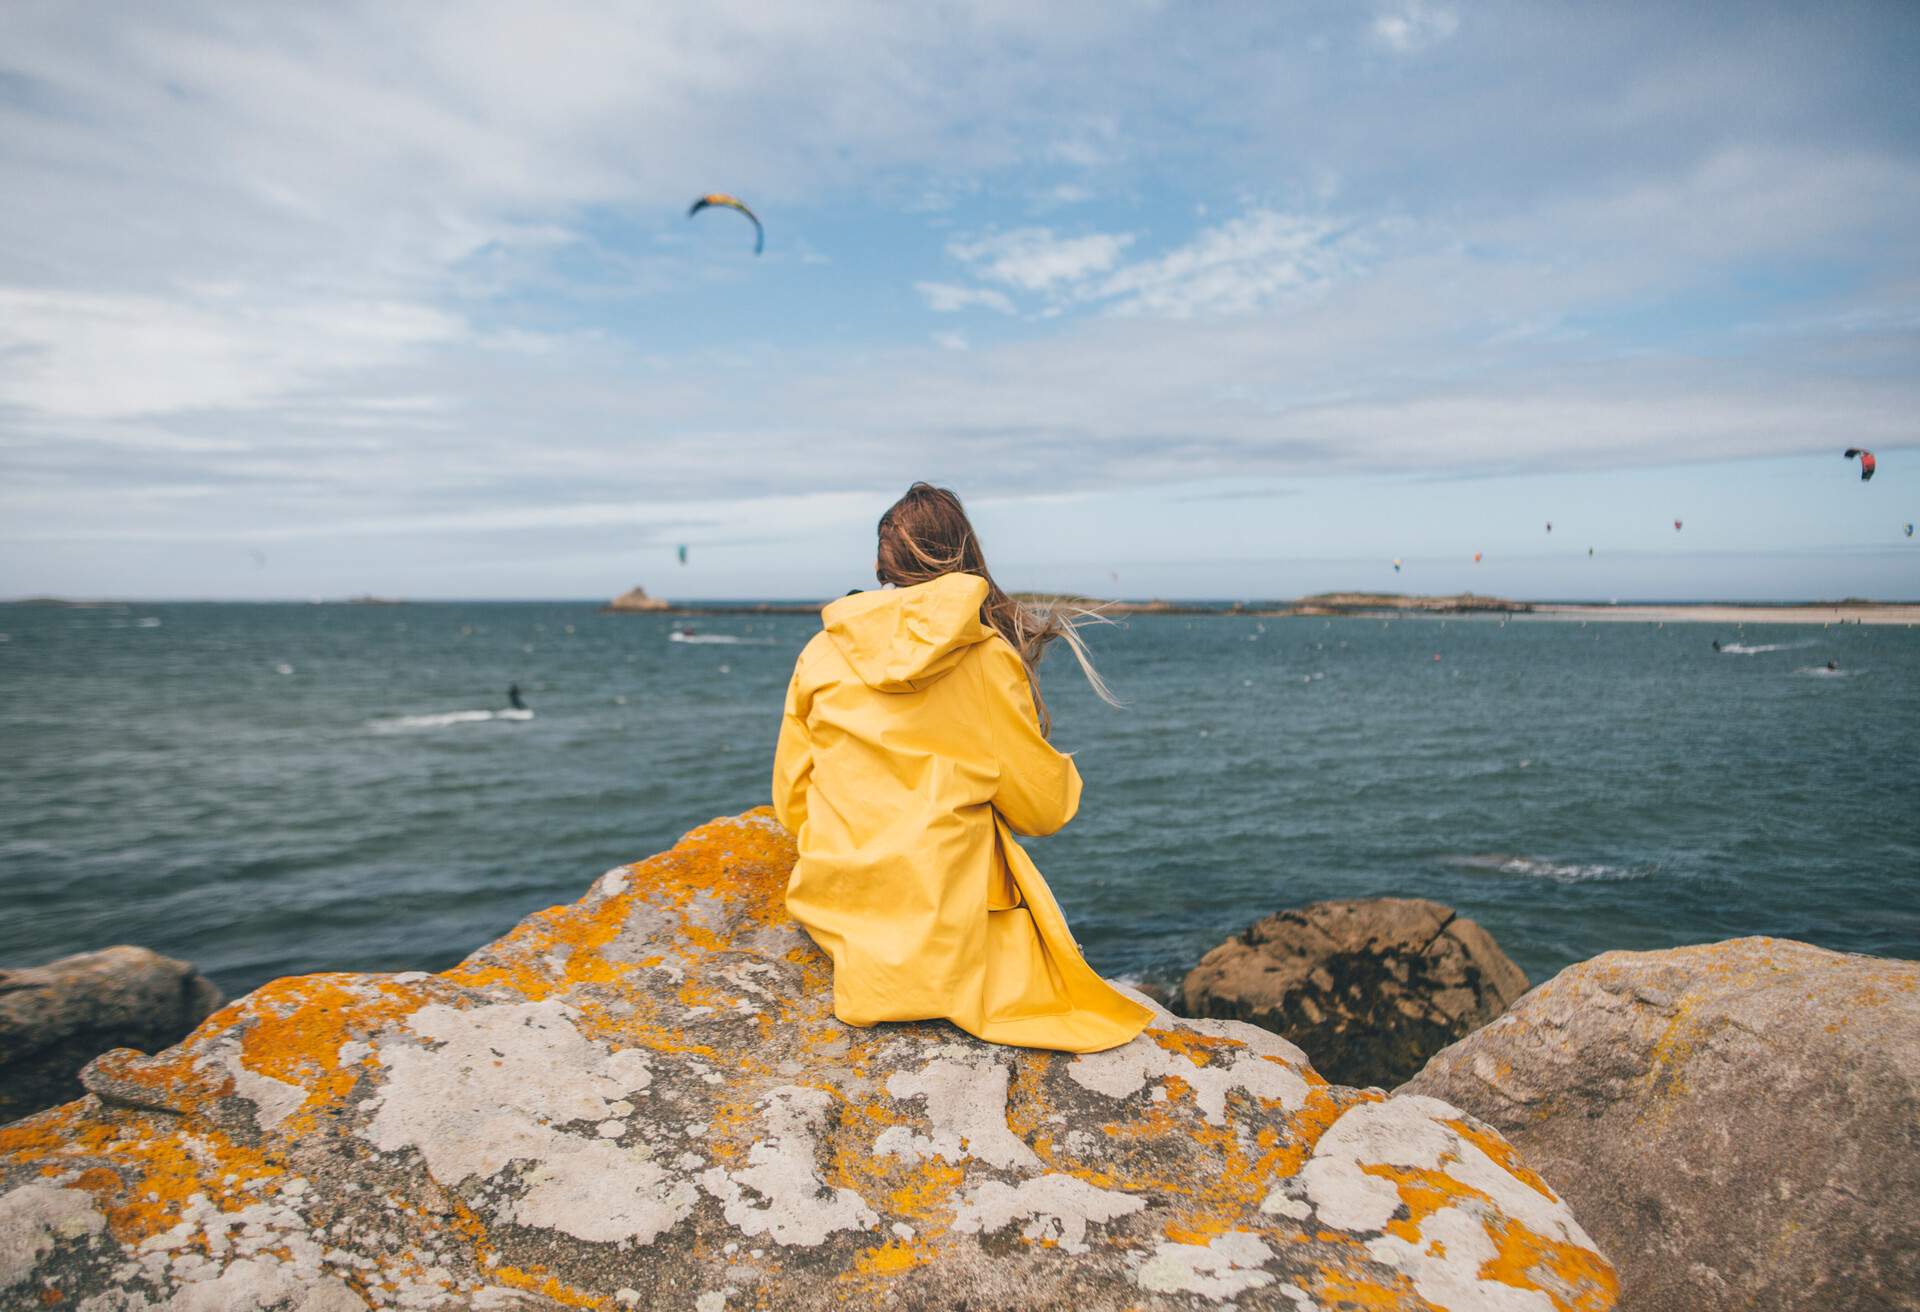 DEST_FRANCE_BRITTANY_LANDEDA_THEME_WOMAN_SEA_GettyImages